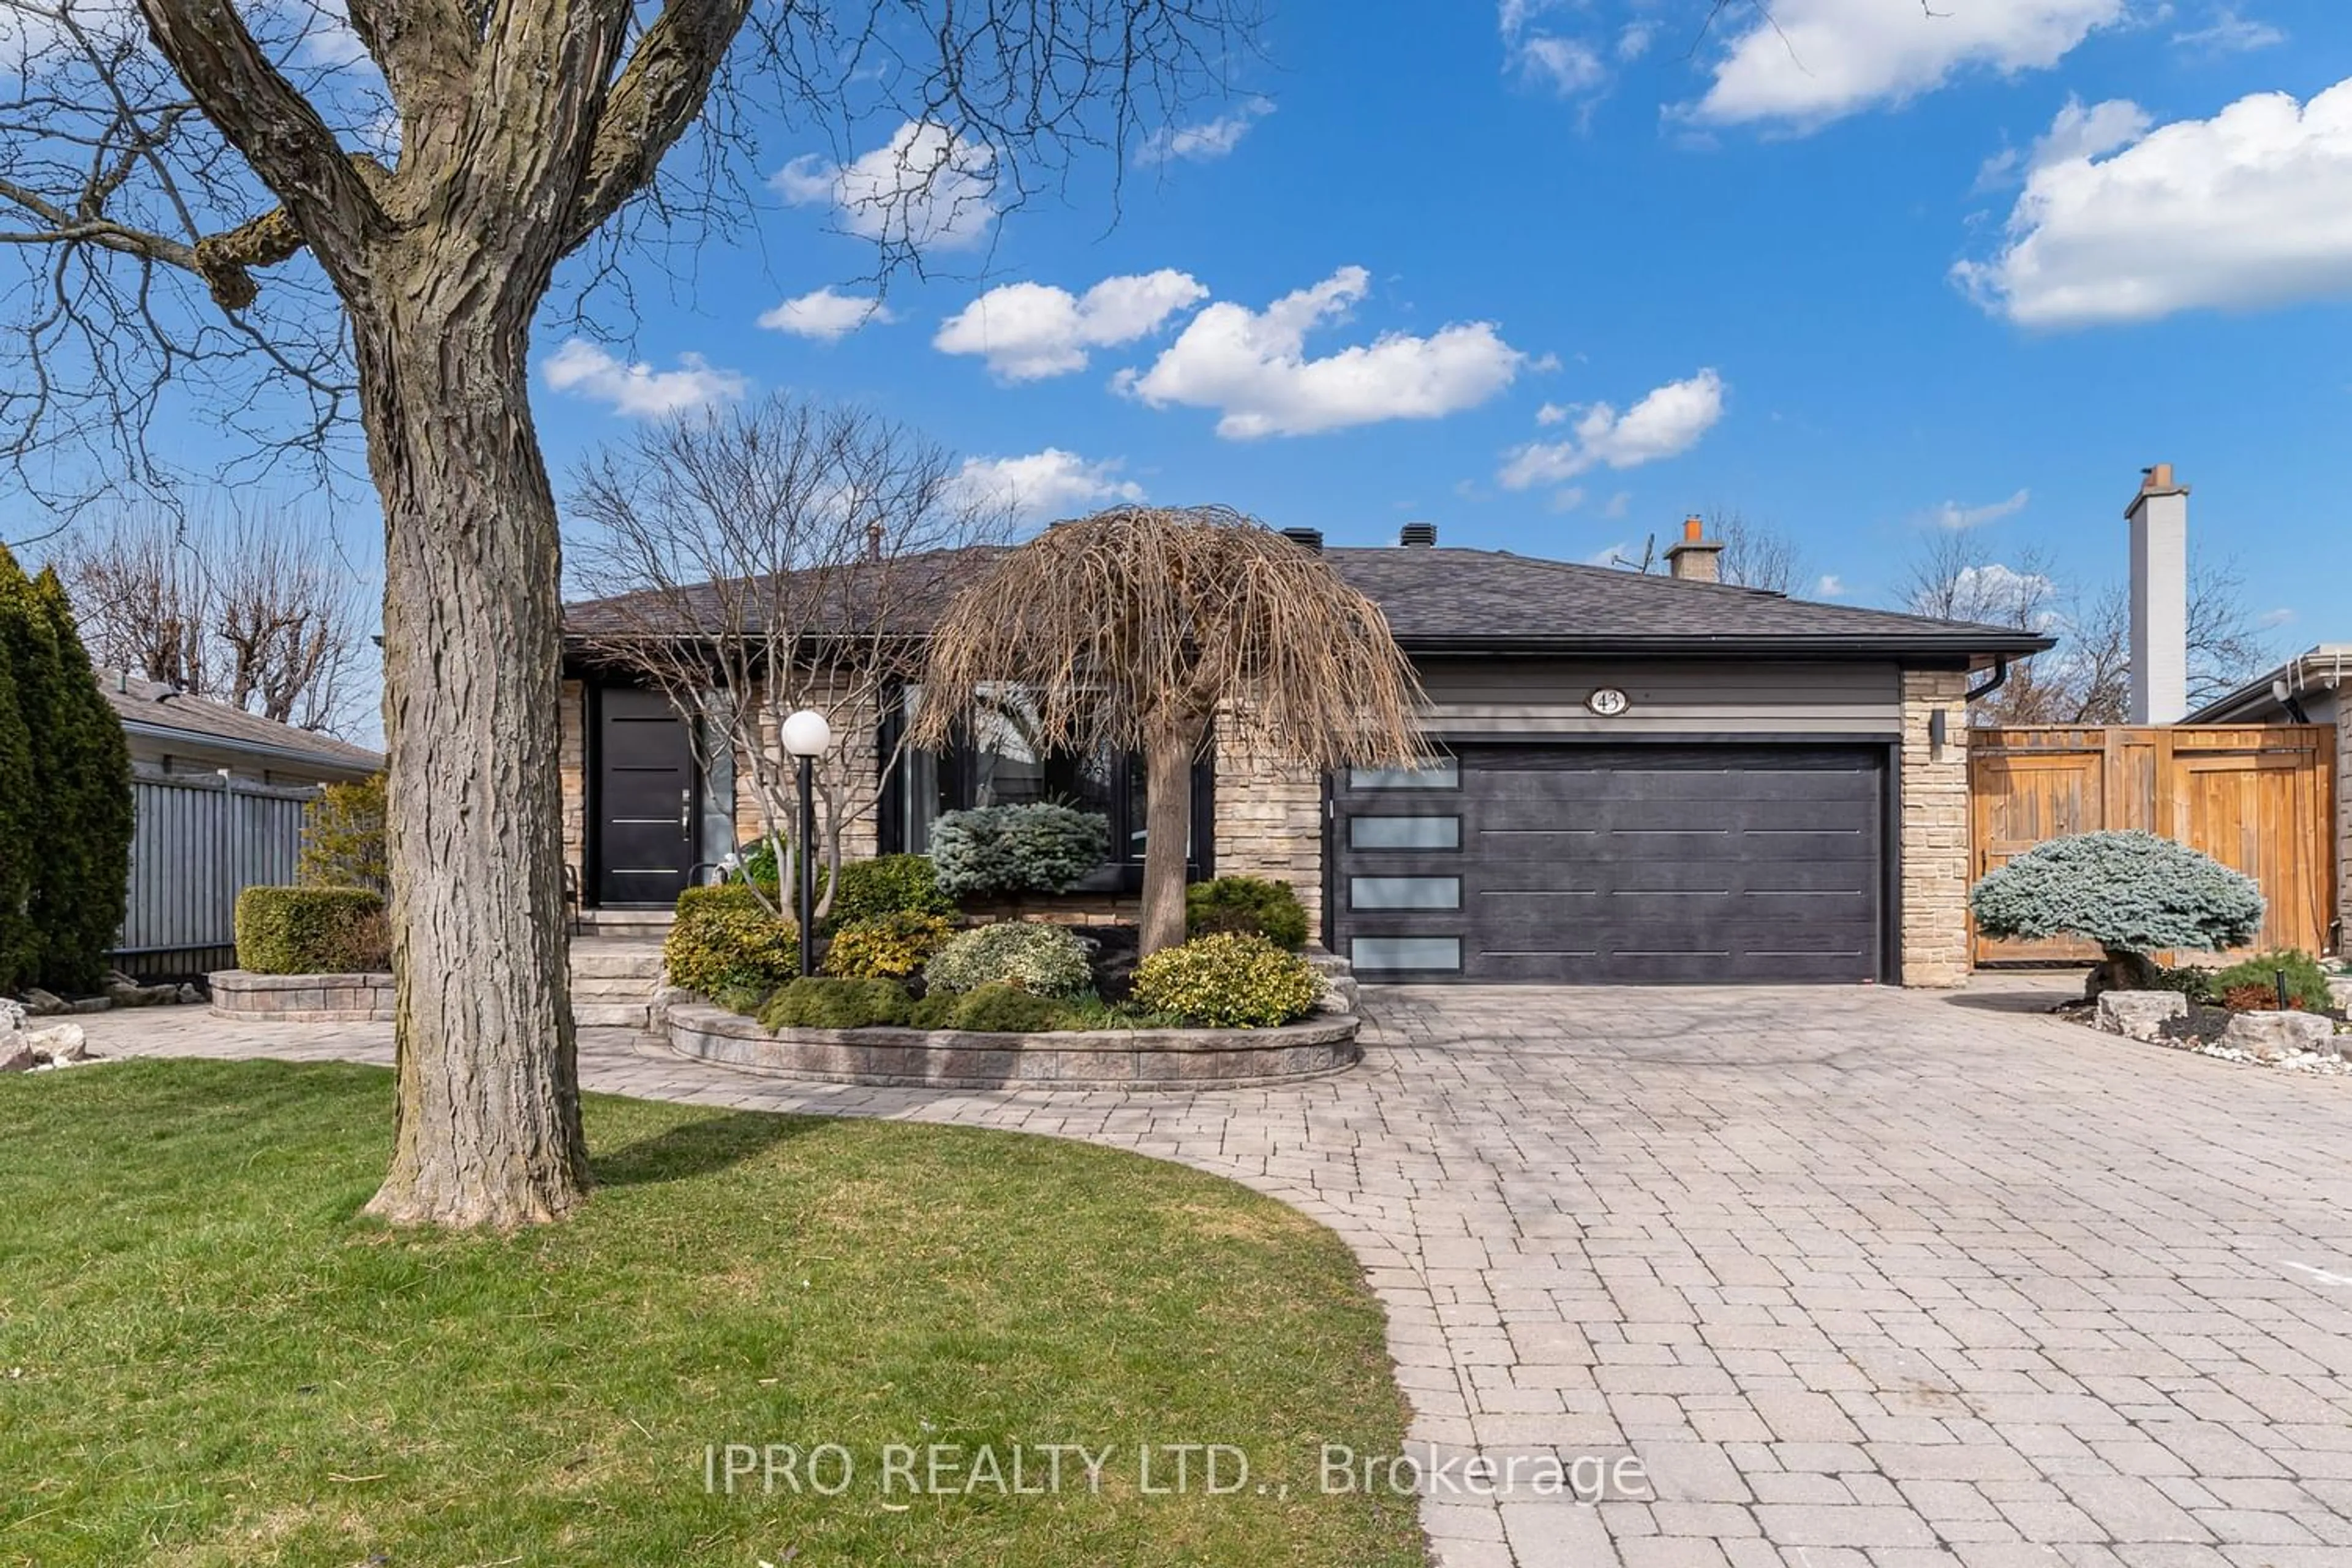 Frontside or backside of a home for 43 Ferndale Cres, Brampton Ontario L6W 1G1